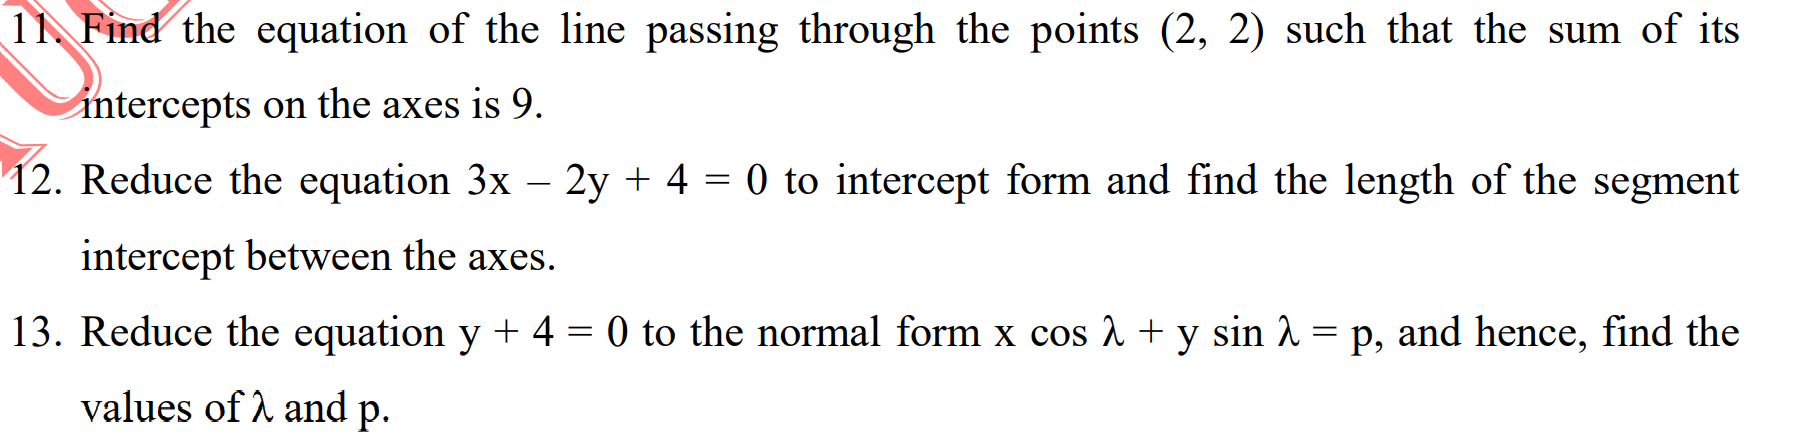 11 Find the equation of the line passing through the points (2, 2) such that the sum of its
intercepts on the axes is 9.
